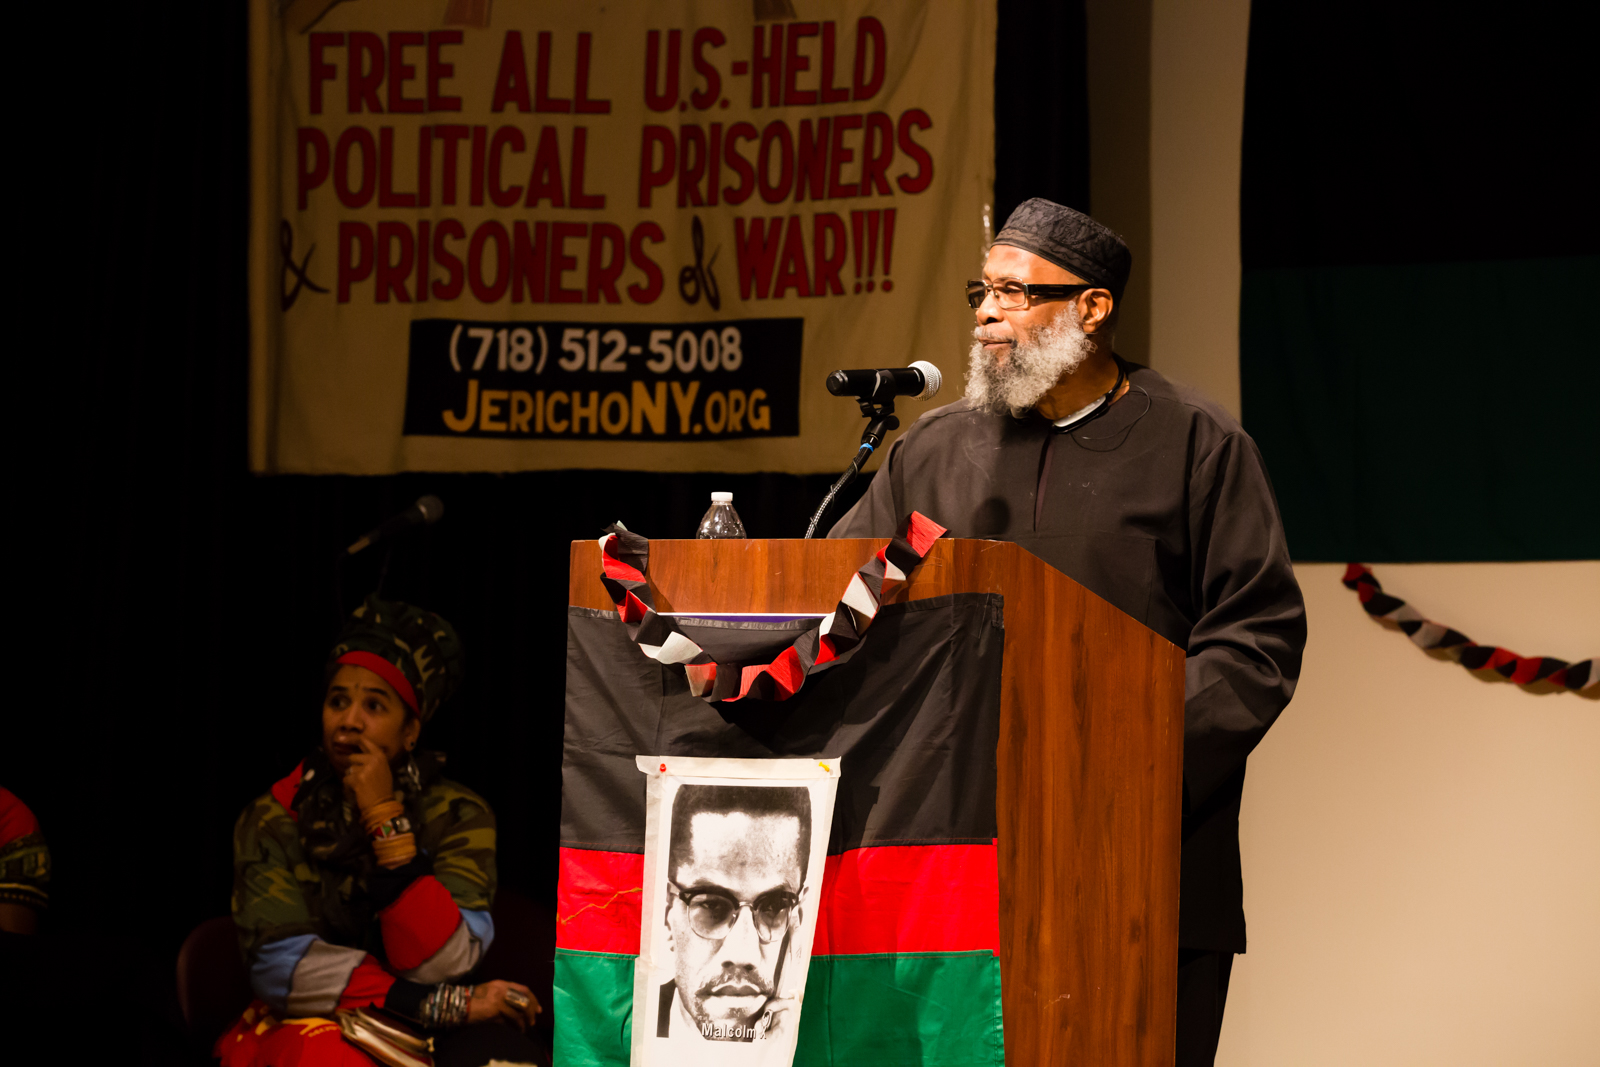 Black freedom fighter tribute points to restorative